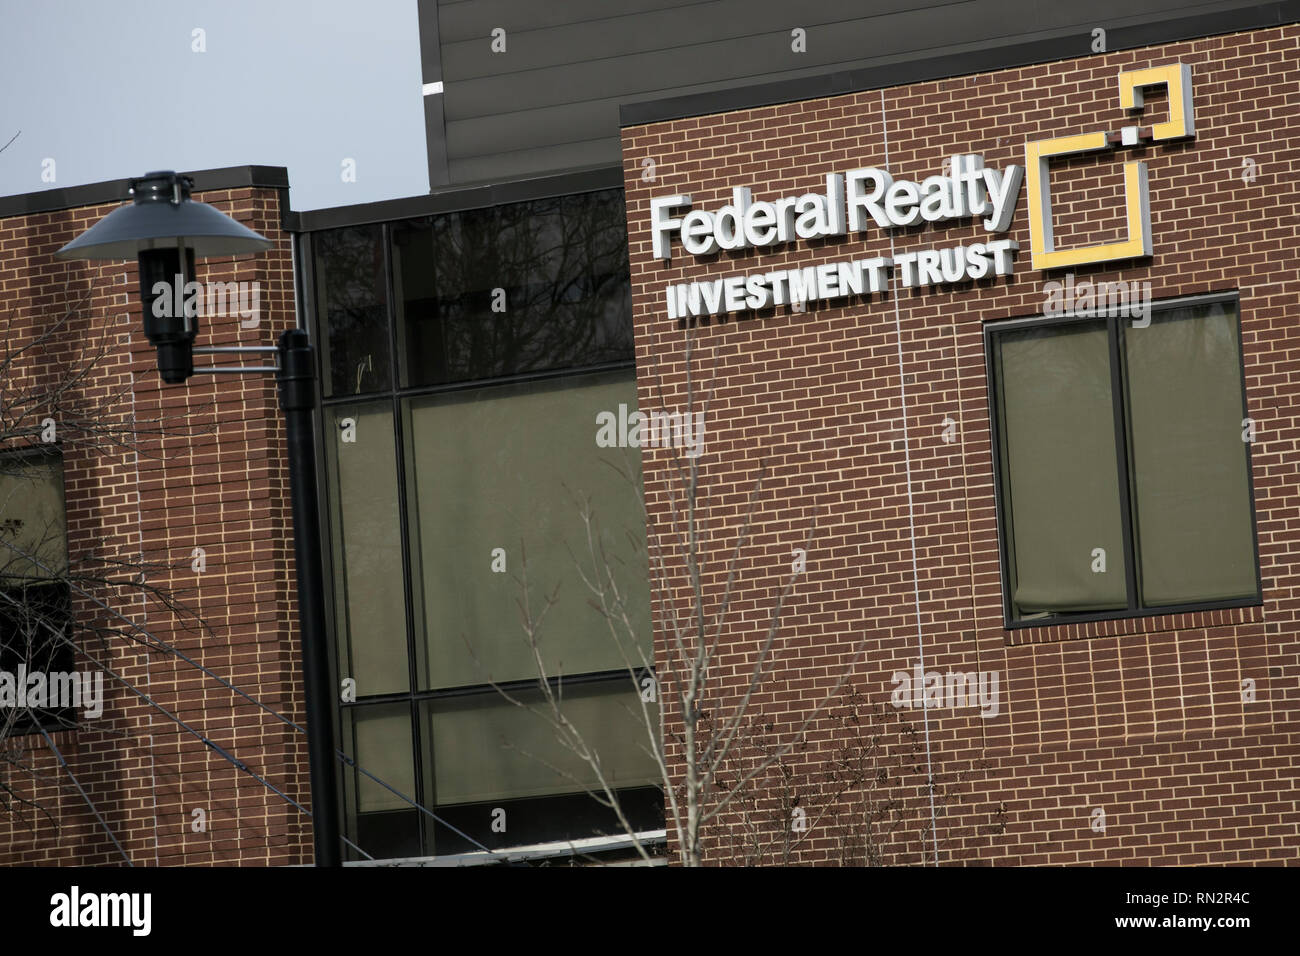 A logo sign outside of the headquarters of Federal Realty Investment Trust in Rockville, Maryland on February 10, 2019. Stock Photo